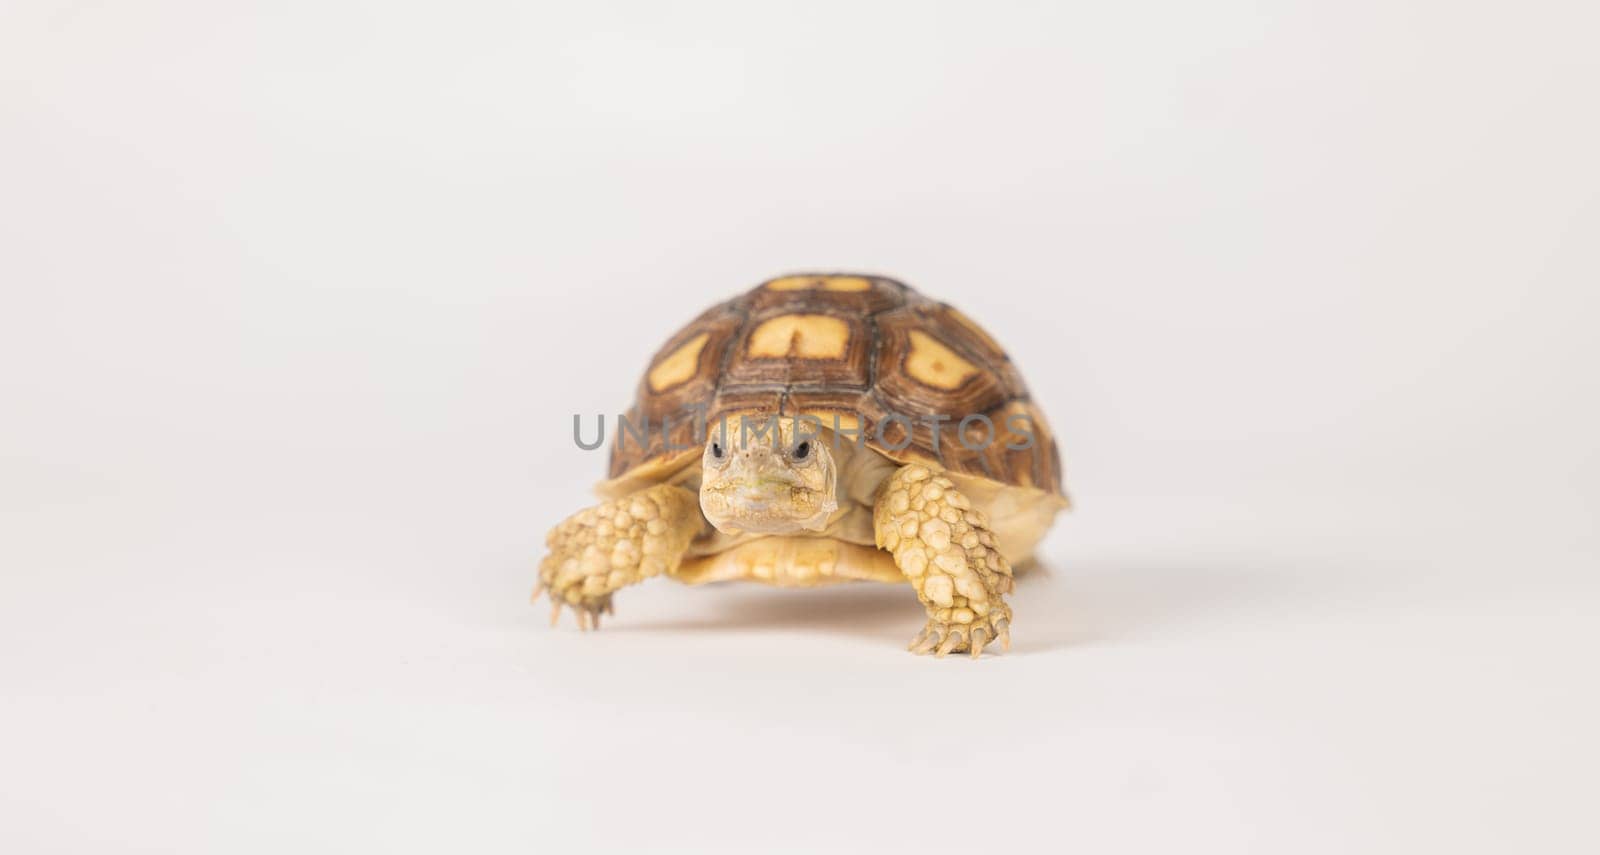 An African spurred tortoise, or sulcata tortoise, is featured in this isolated portrait on a white background. This large and cute reptile embodies the beauty of nature's design.